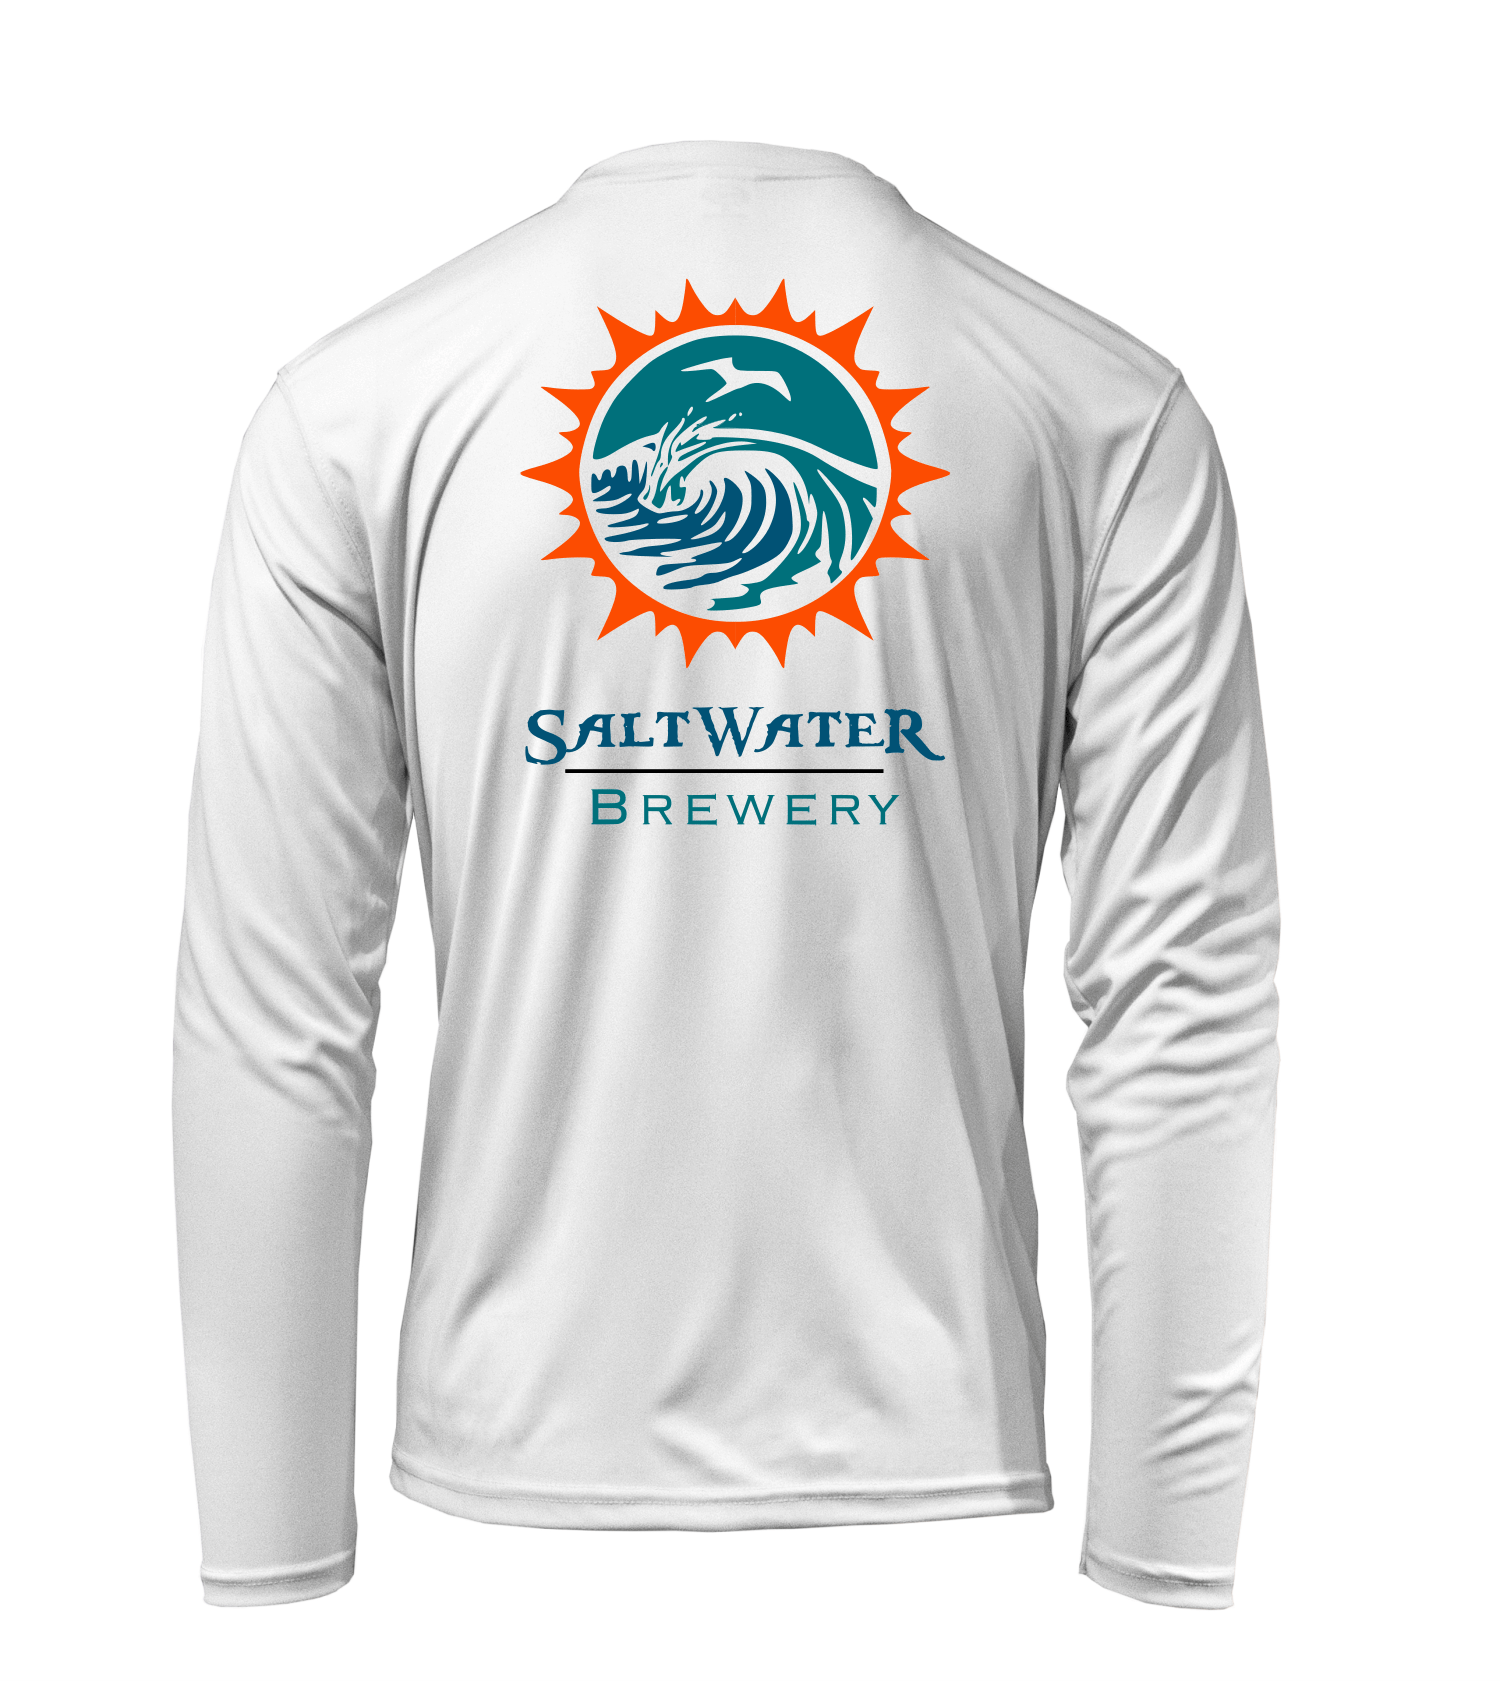 https://cdn.shopify.com/s/files/1/1972/1989/products/saltwater-brewery-dolphins-themed-logo-uv-long-sleeve-29368901402687.png?v=1652407493